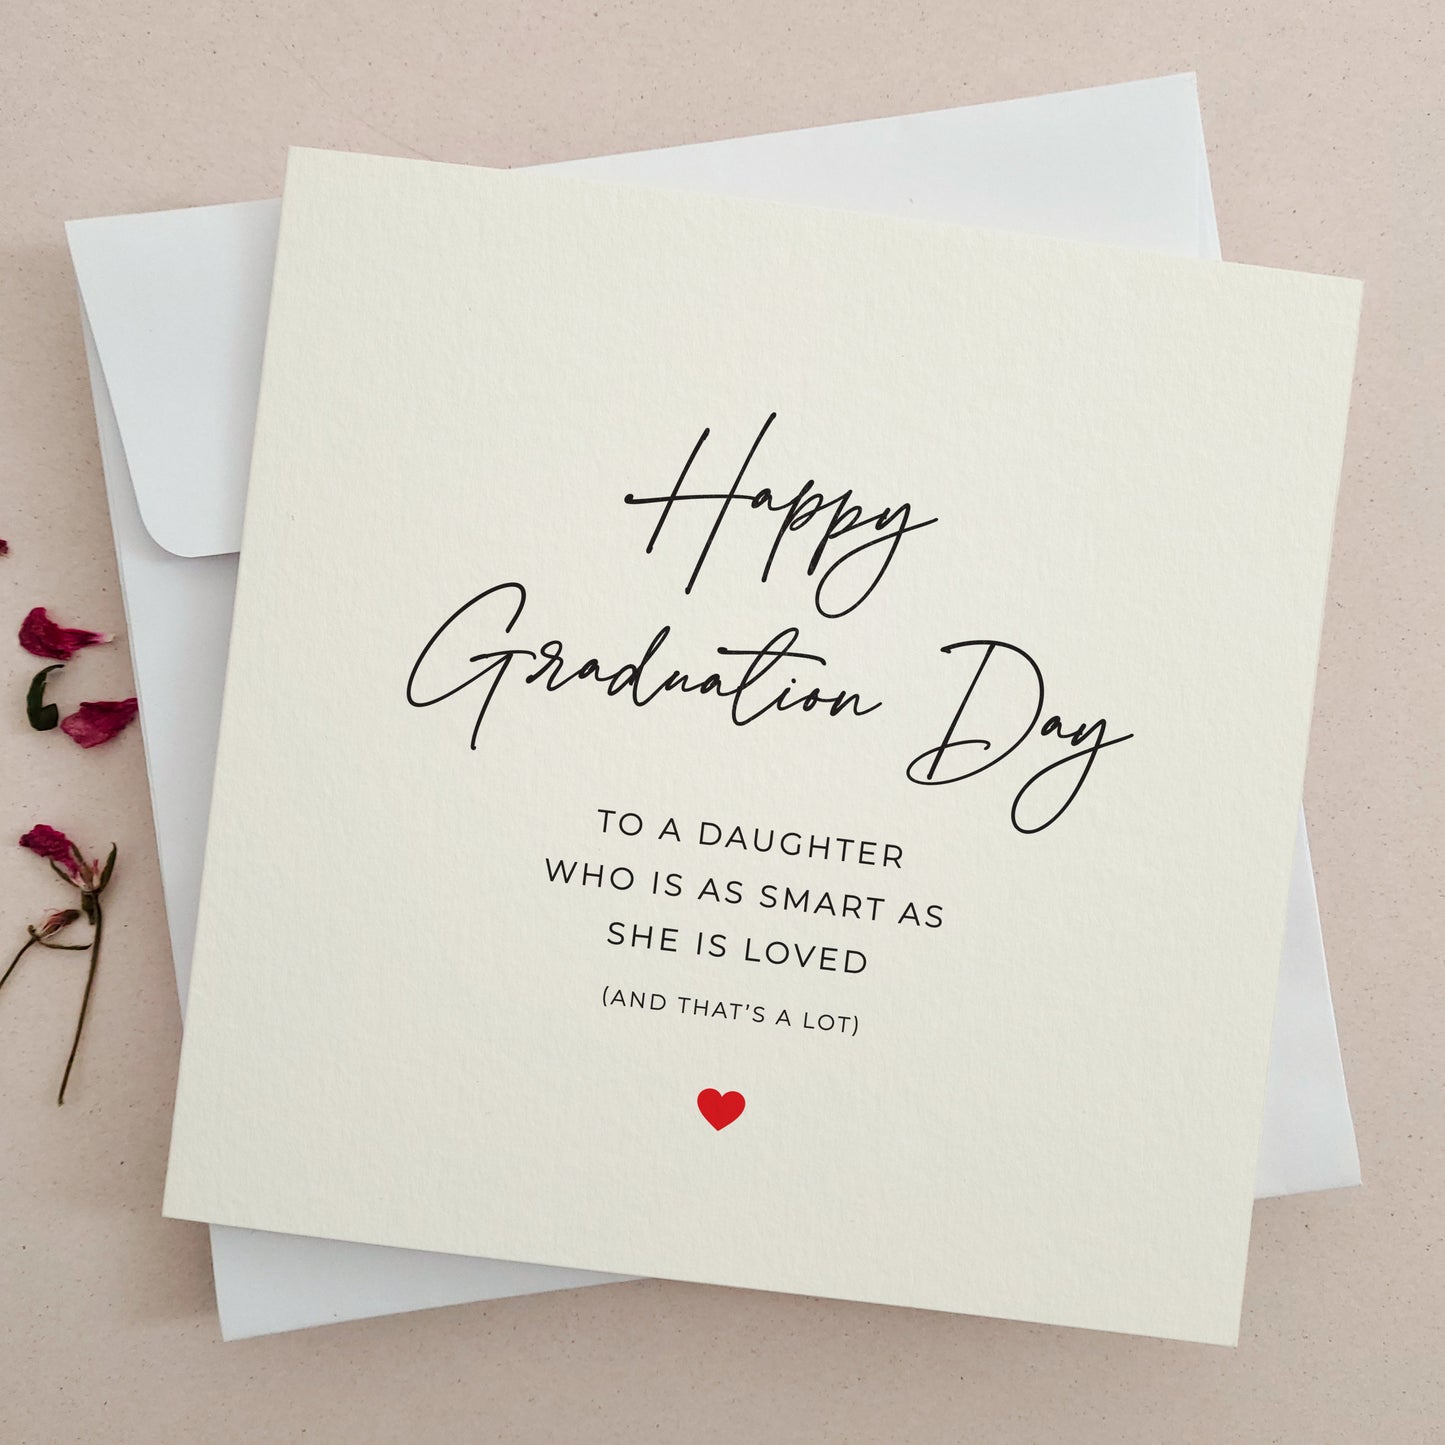 happy graduation day card for a daughter -  XOXOKristen